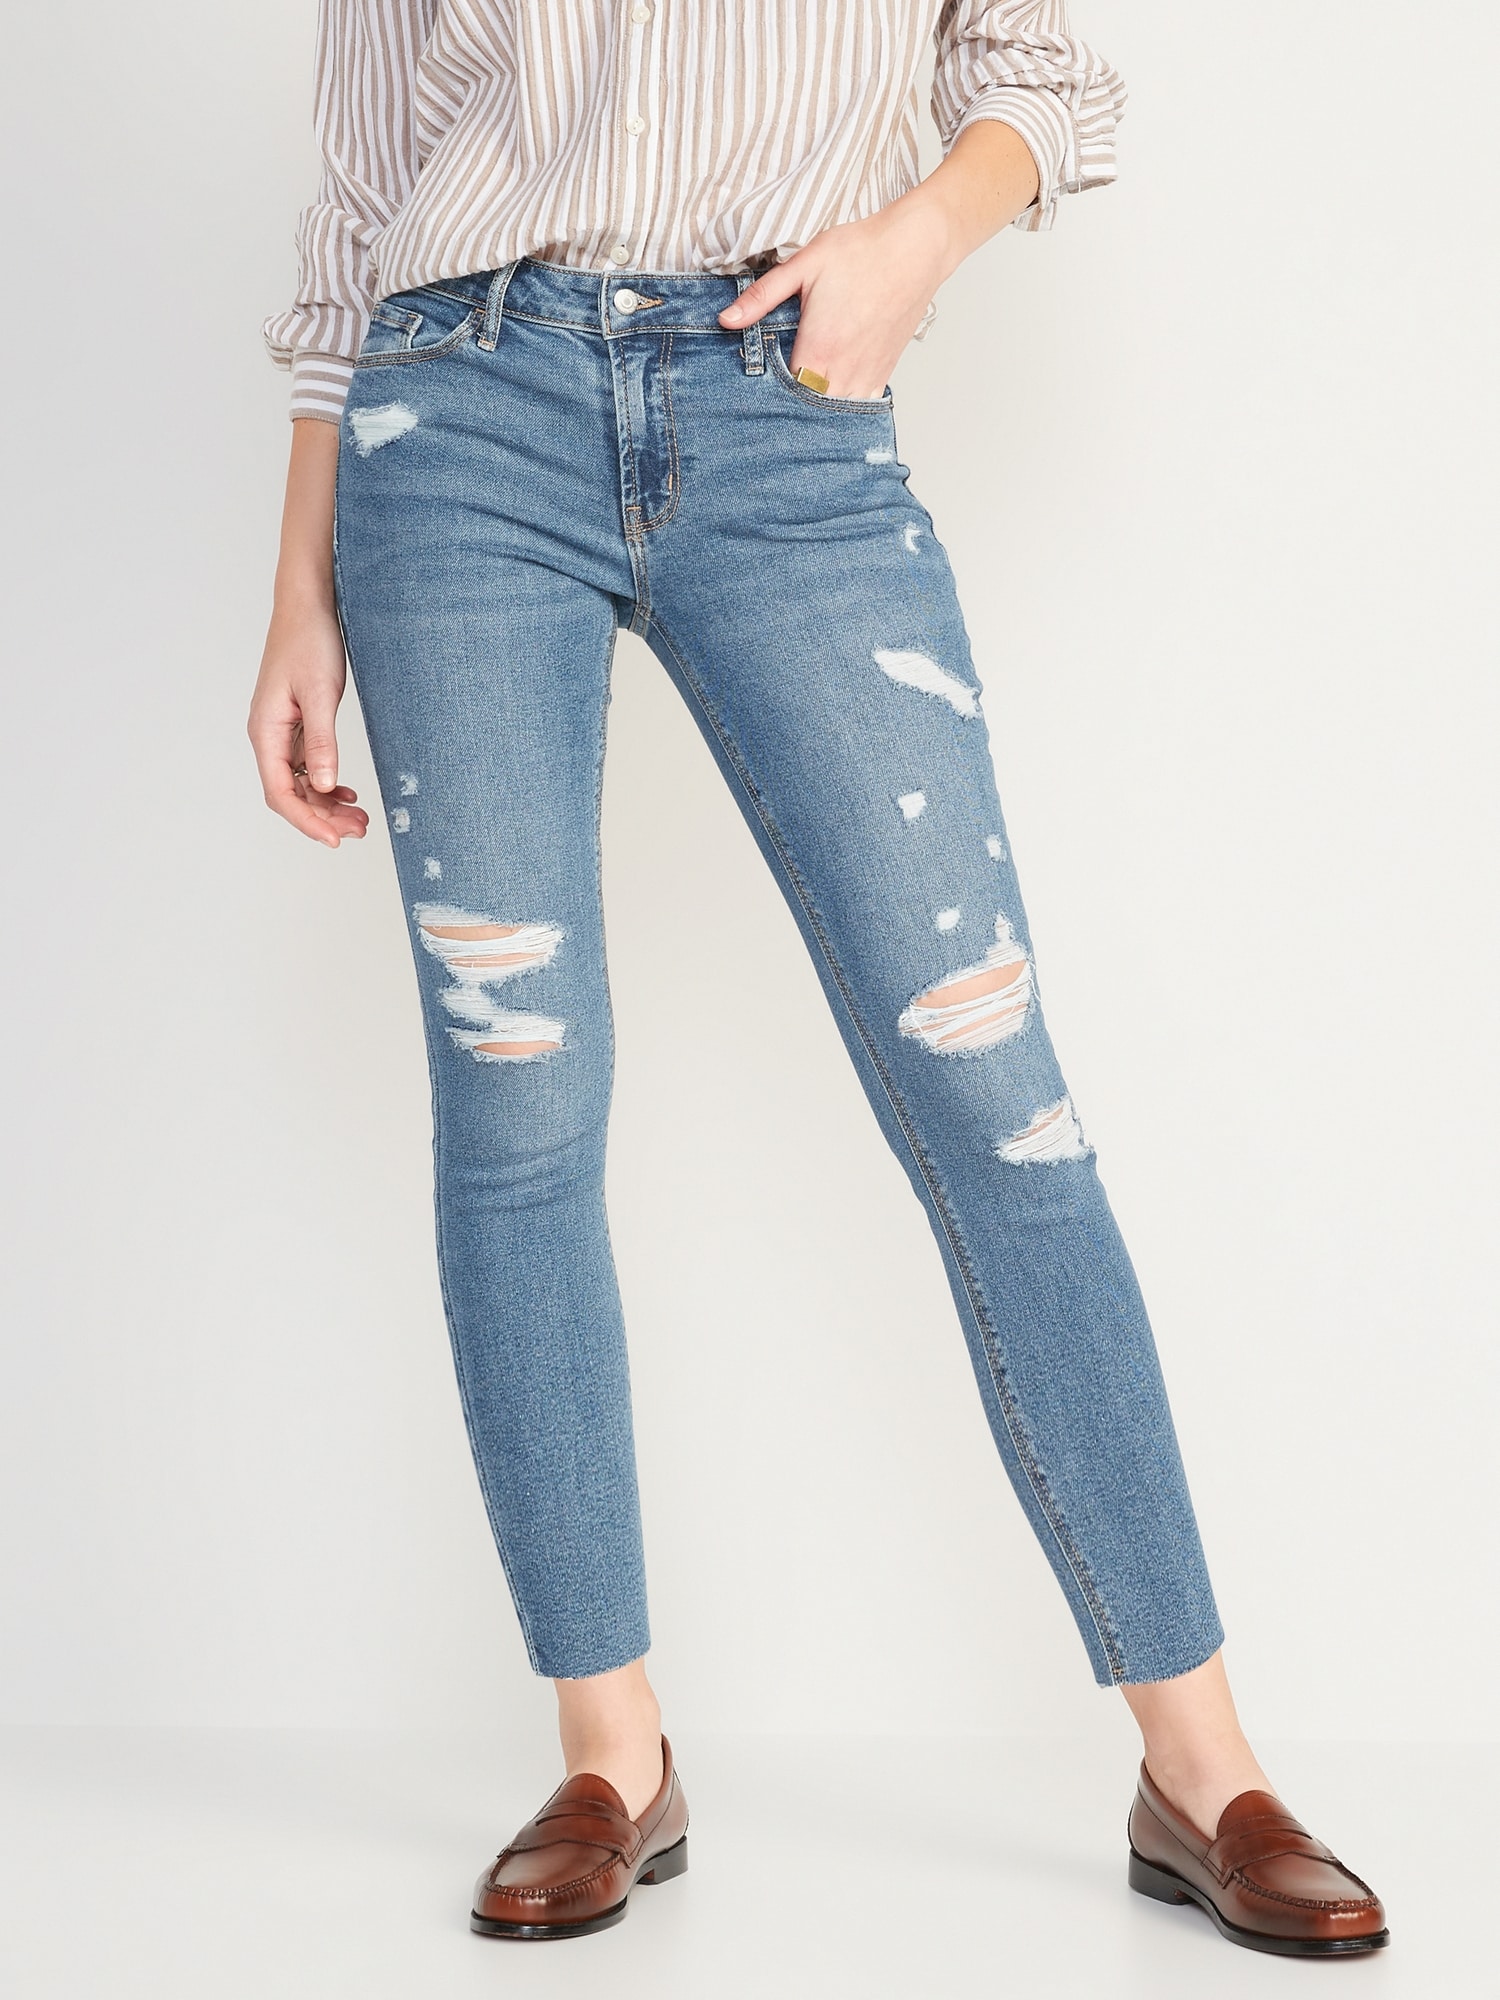 Old Navy Mid-Rise Rockstar Super Skinny Ripped Cut-Off Jeans for Women blue. 1